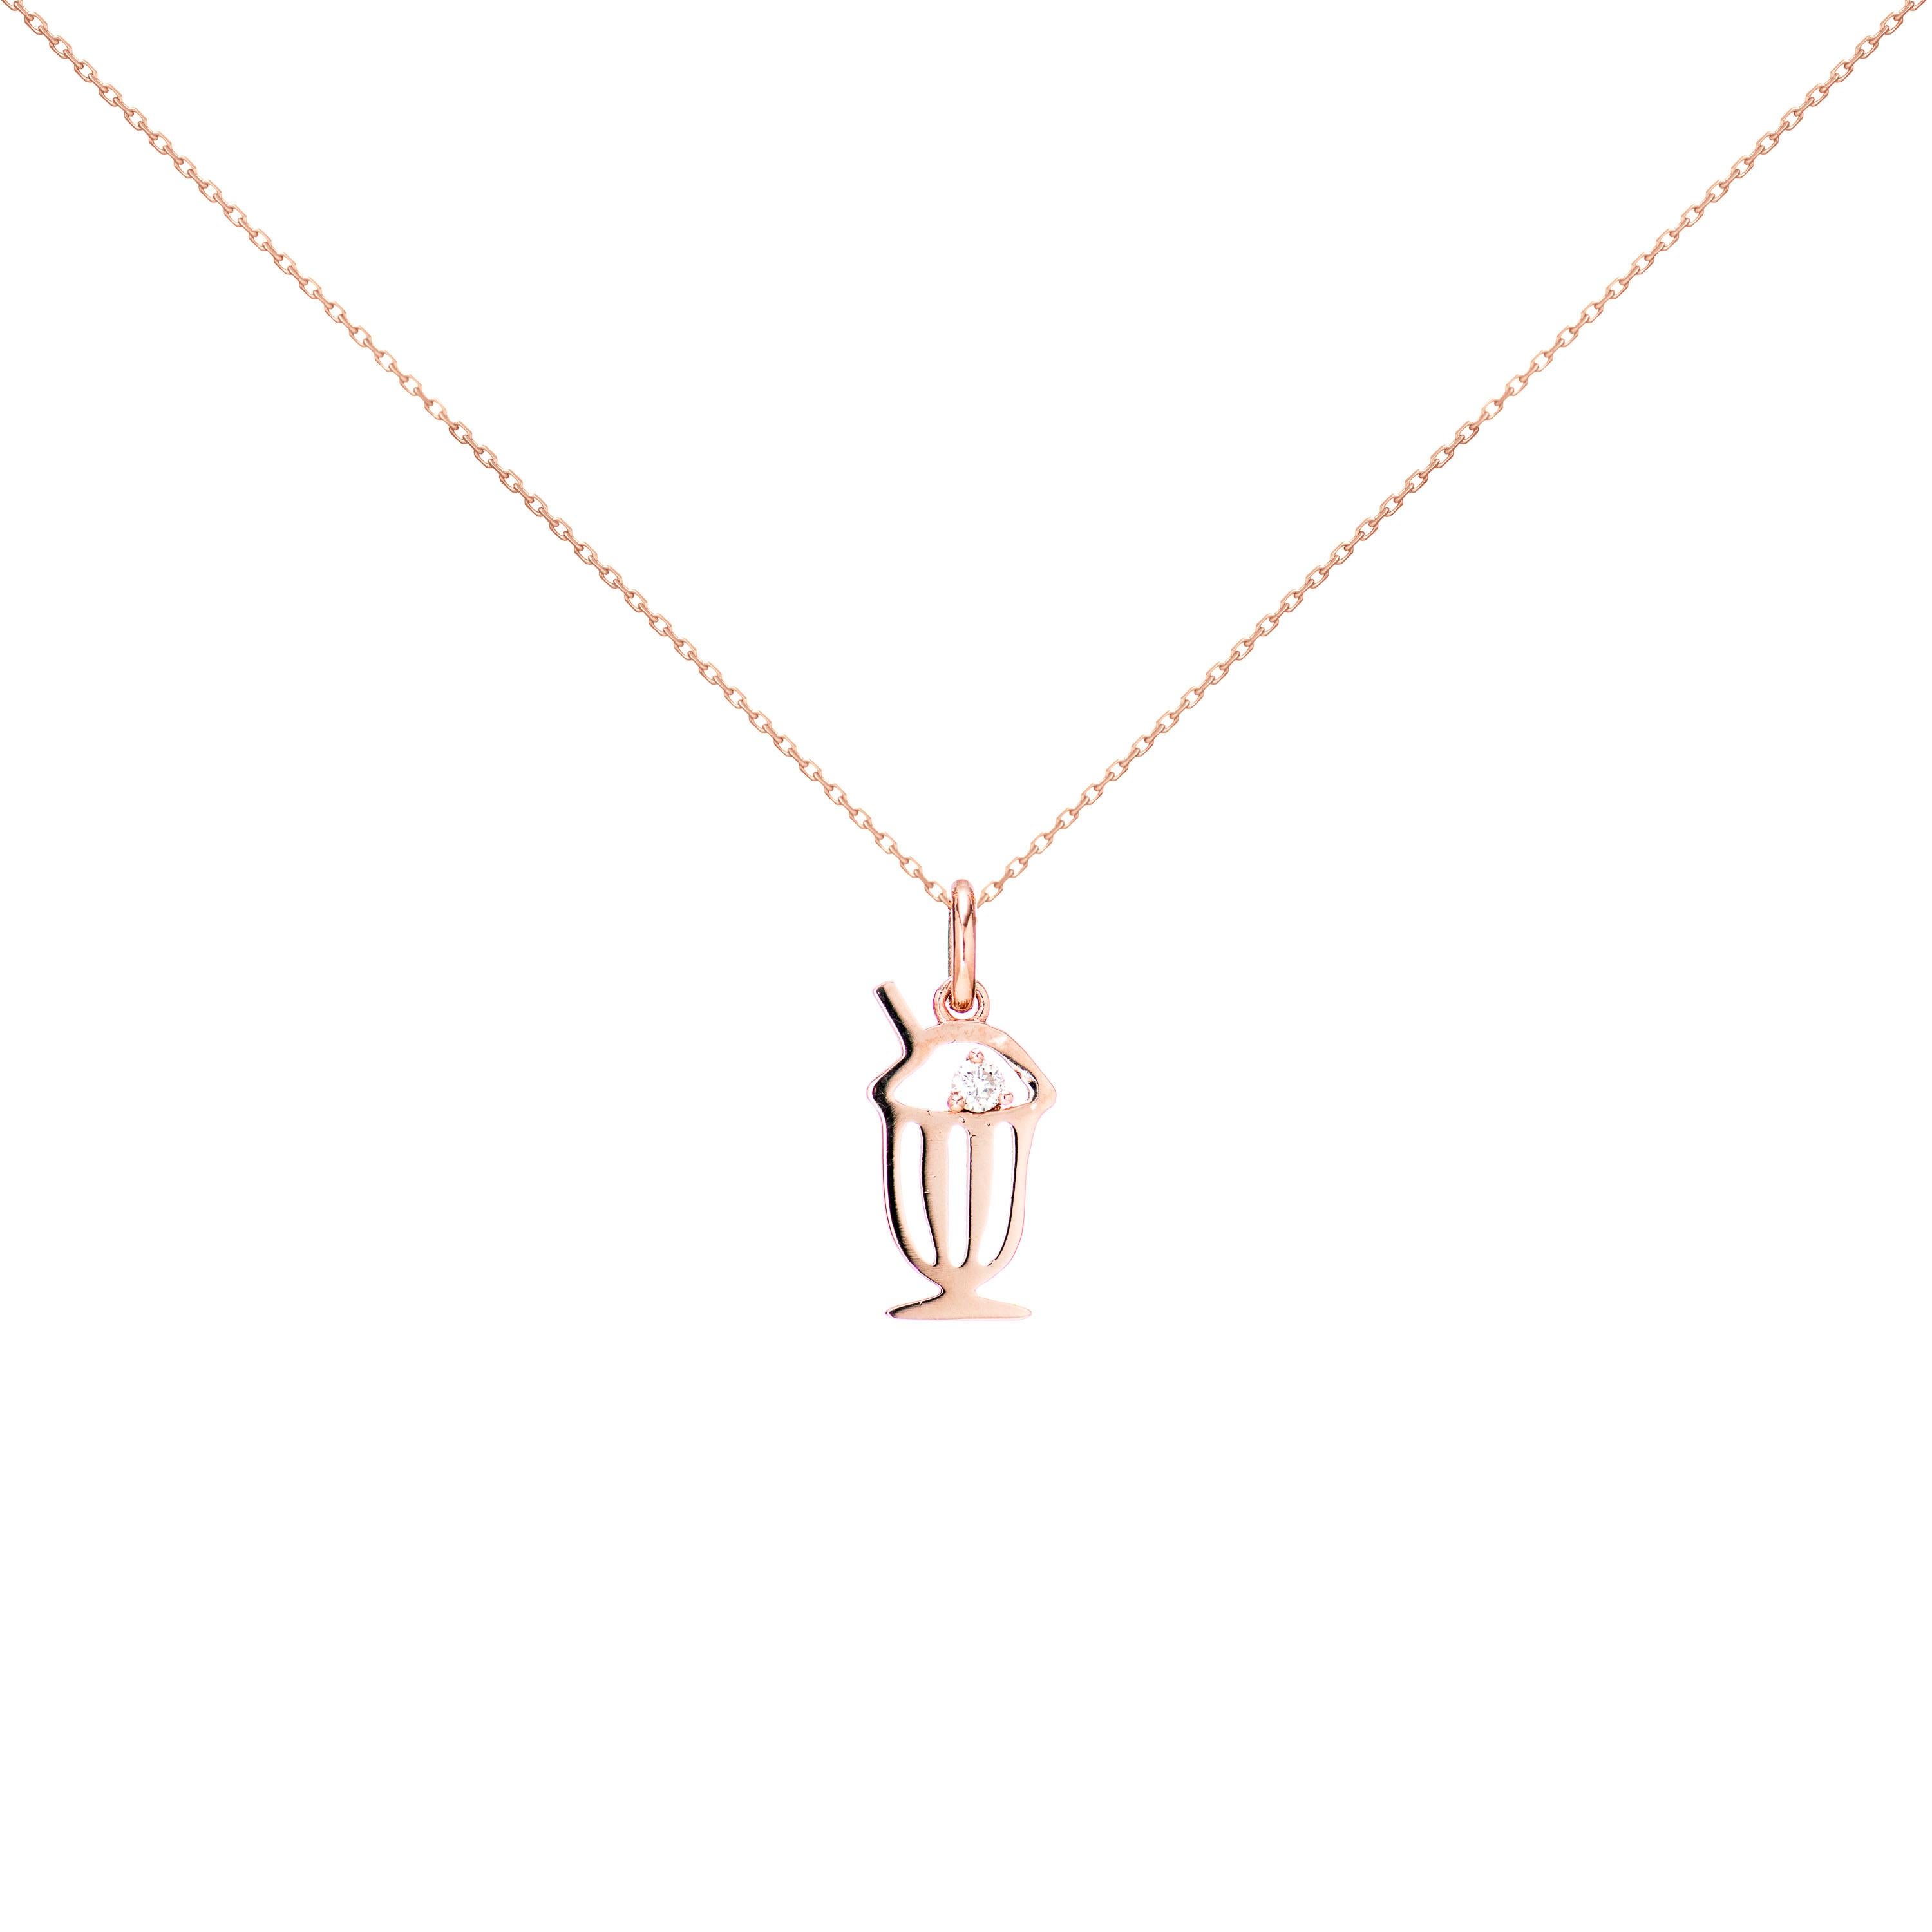 AS29
14kt rose gold diamond Milkshake necklace
If life is about to get tough, just shake it. Boasting a 14kt rose gold construction and adorned with a diamond, this Milkshake necklace from AS29 is all you need for that extra boost of confidence.